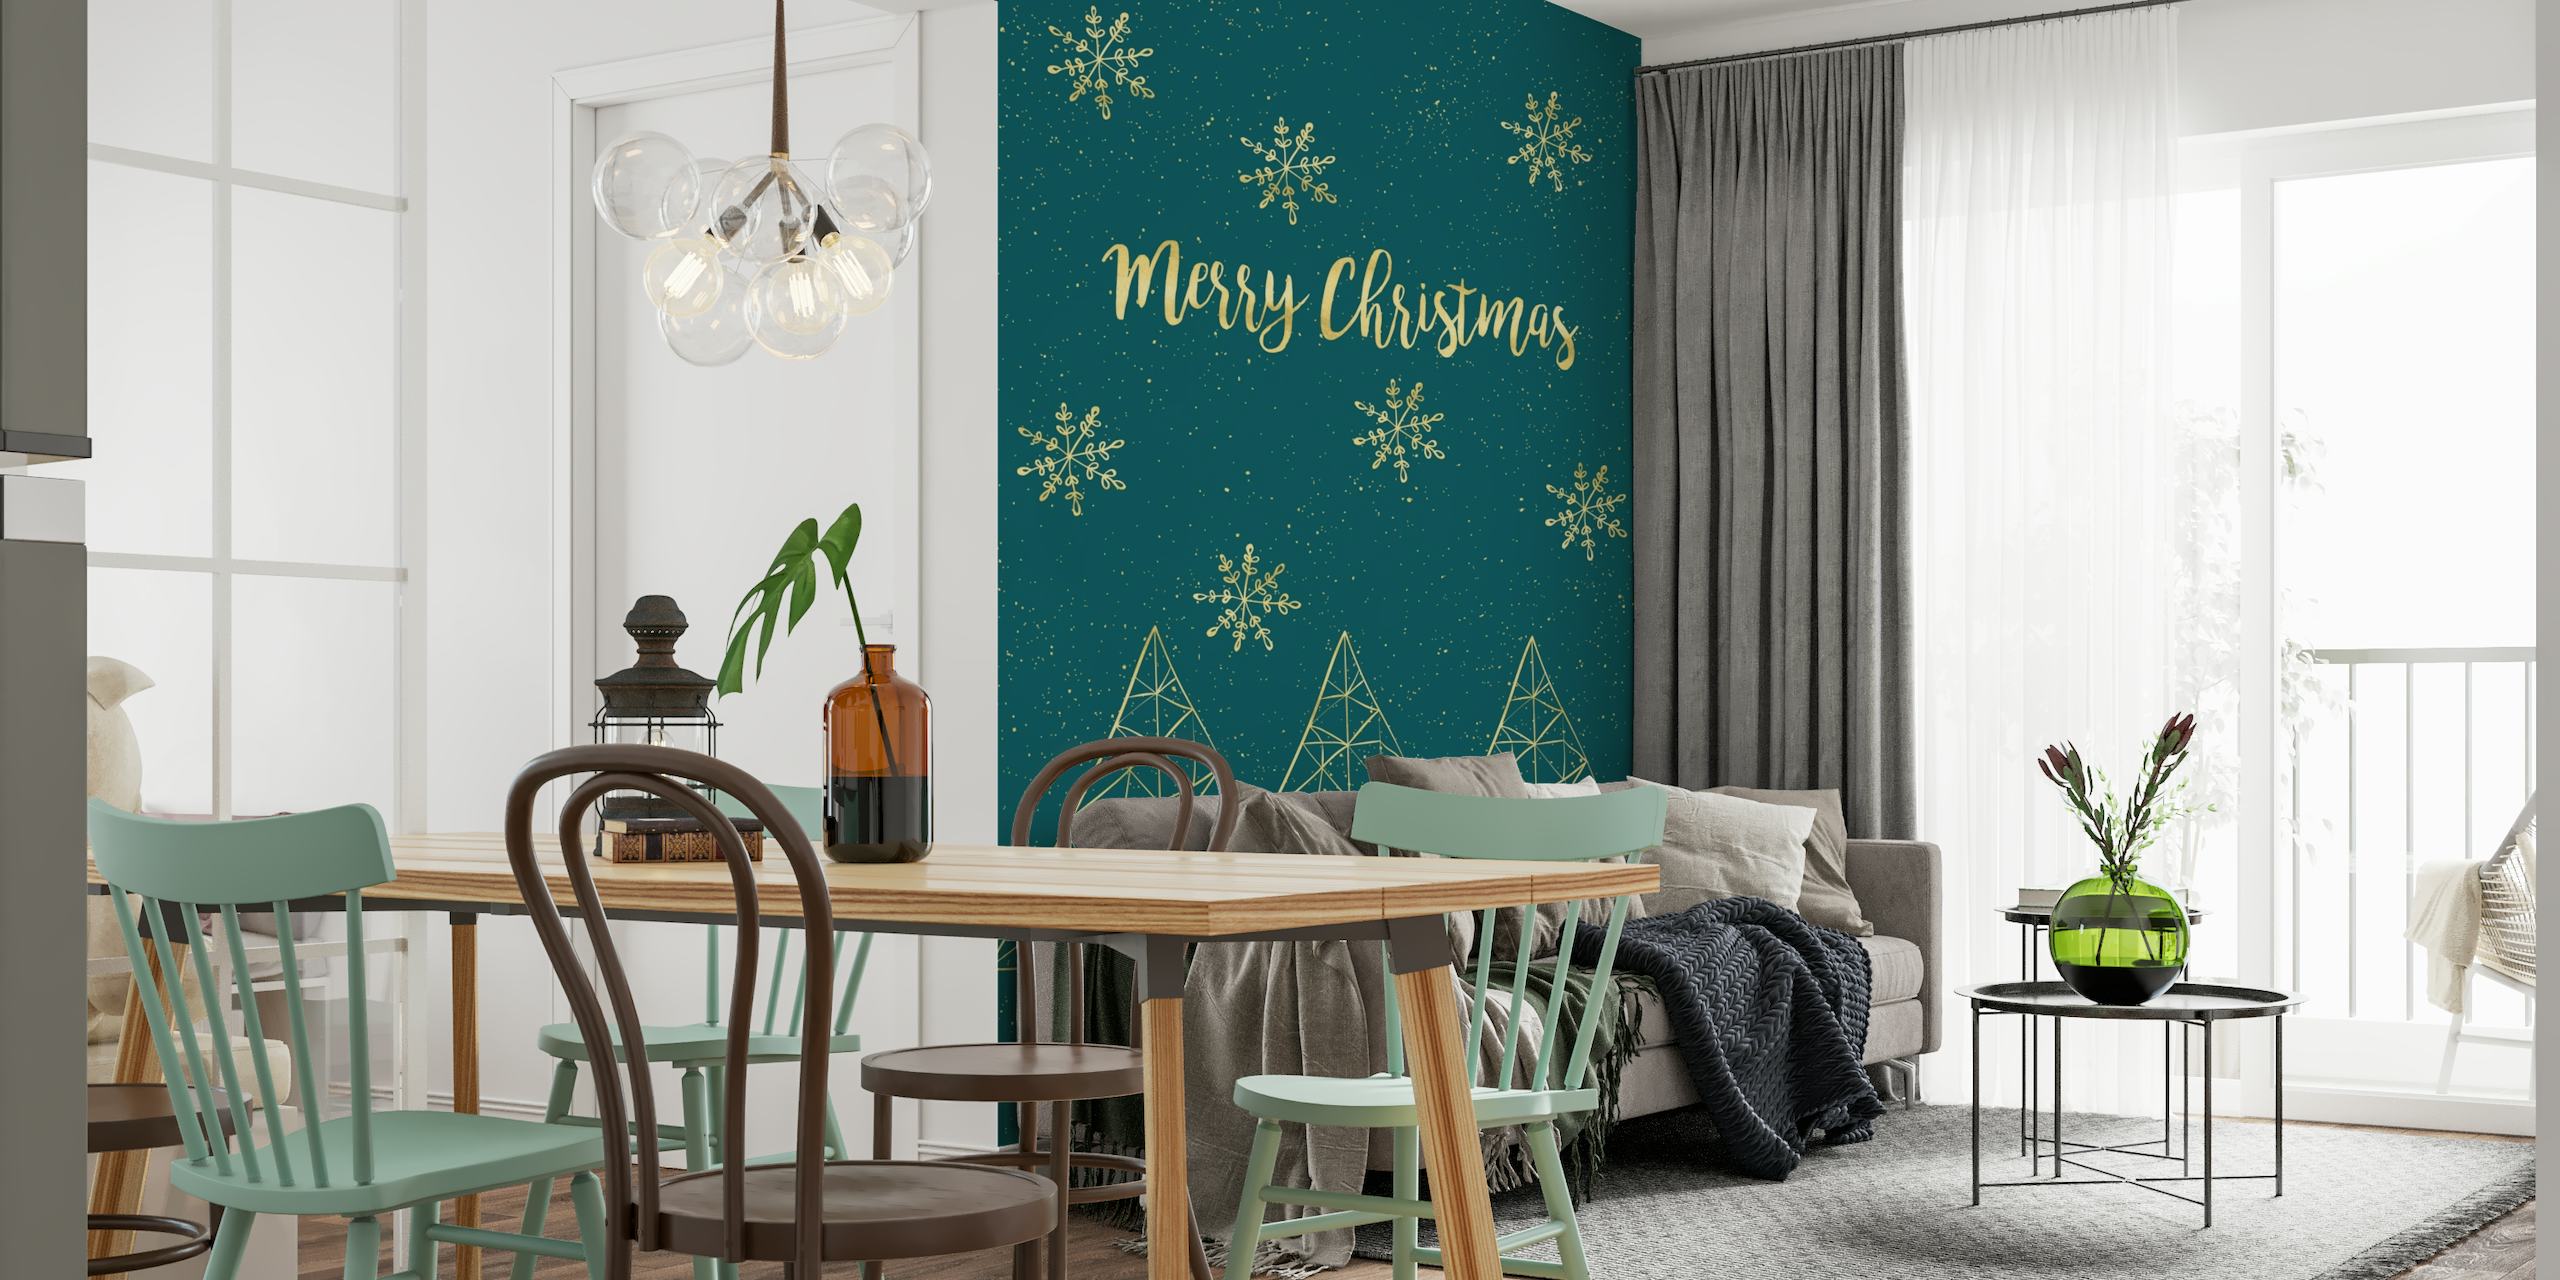 Merry Christmas Teal Gold wallpaper